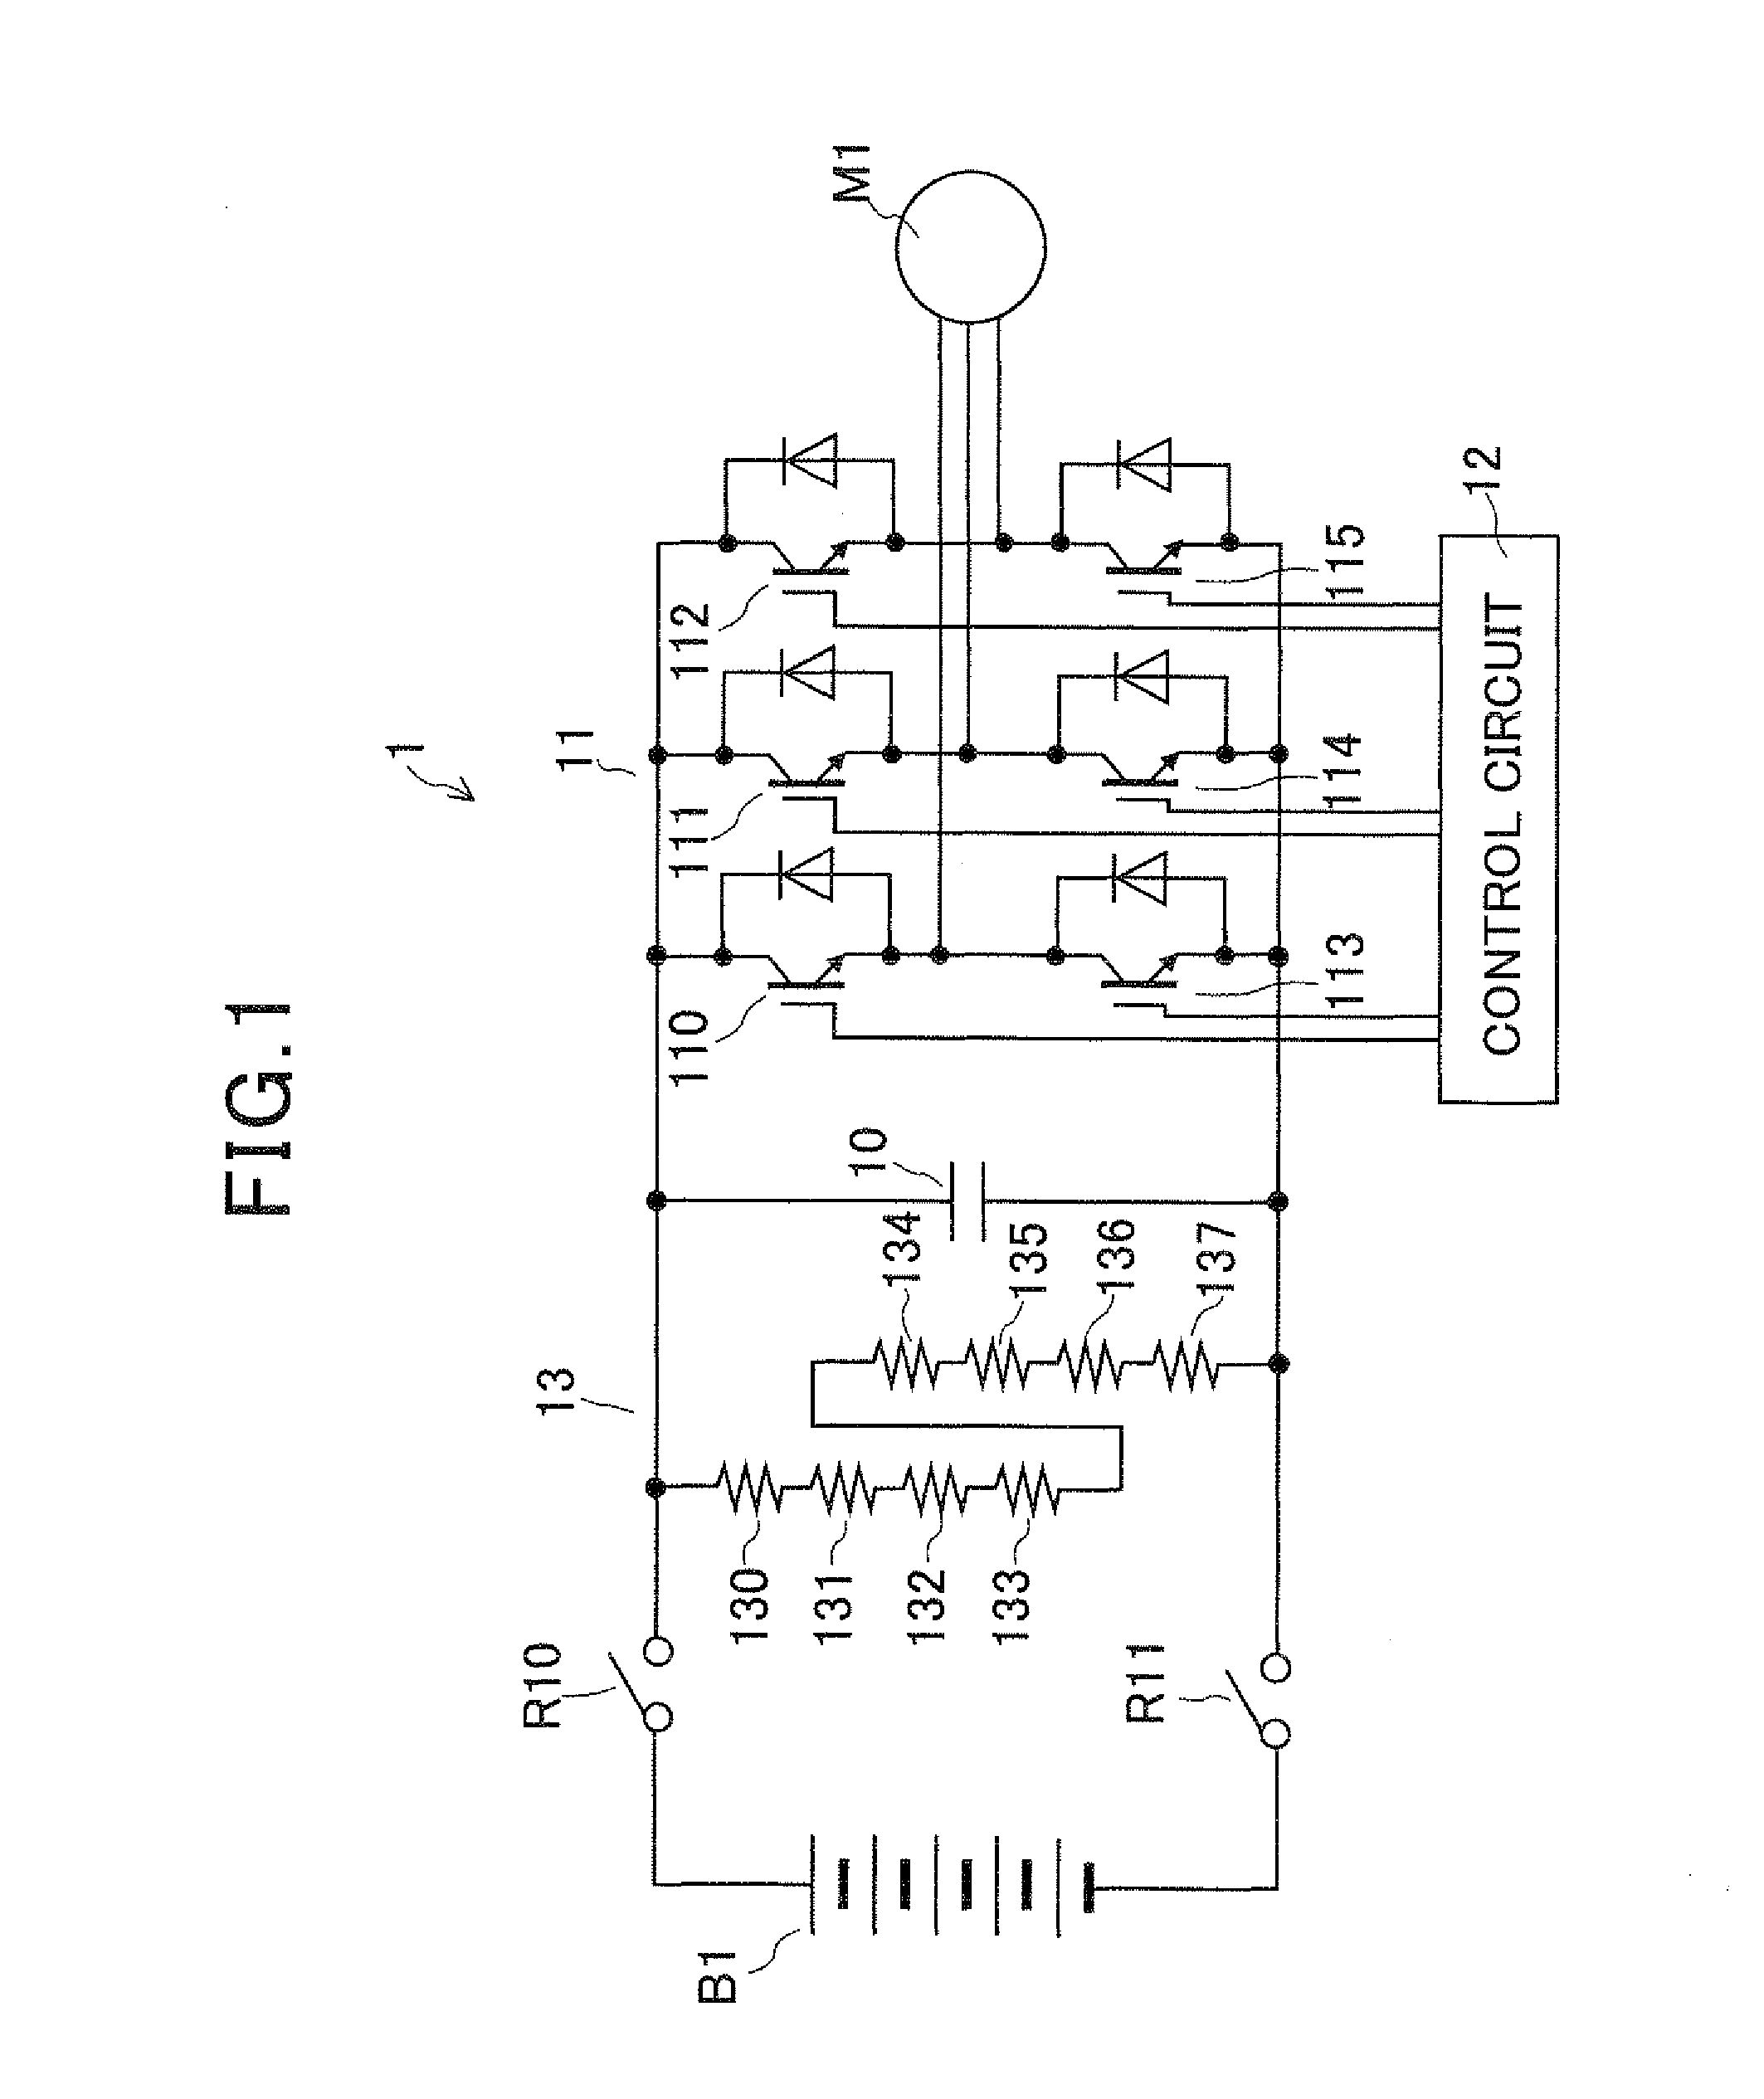 Electronic system having resistors serially connected